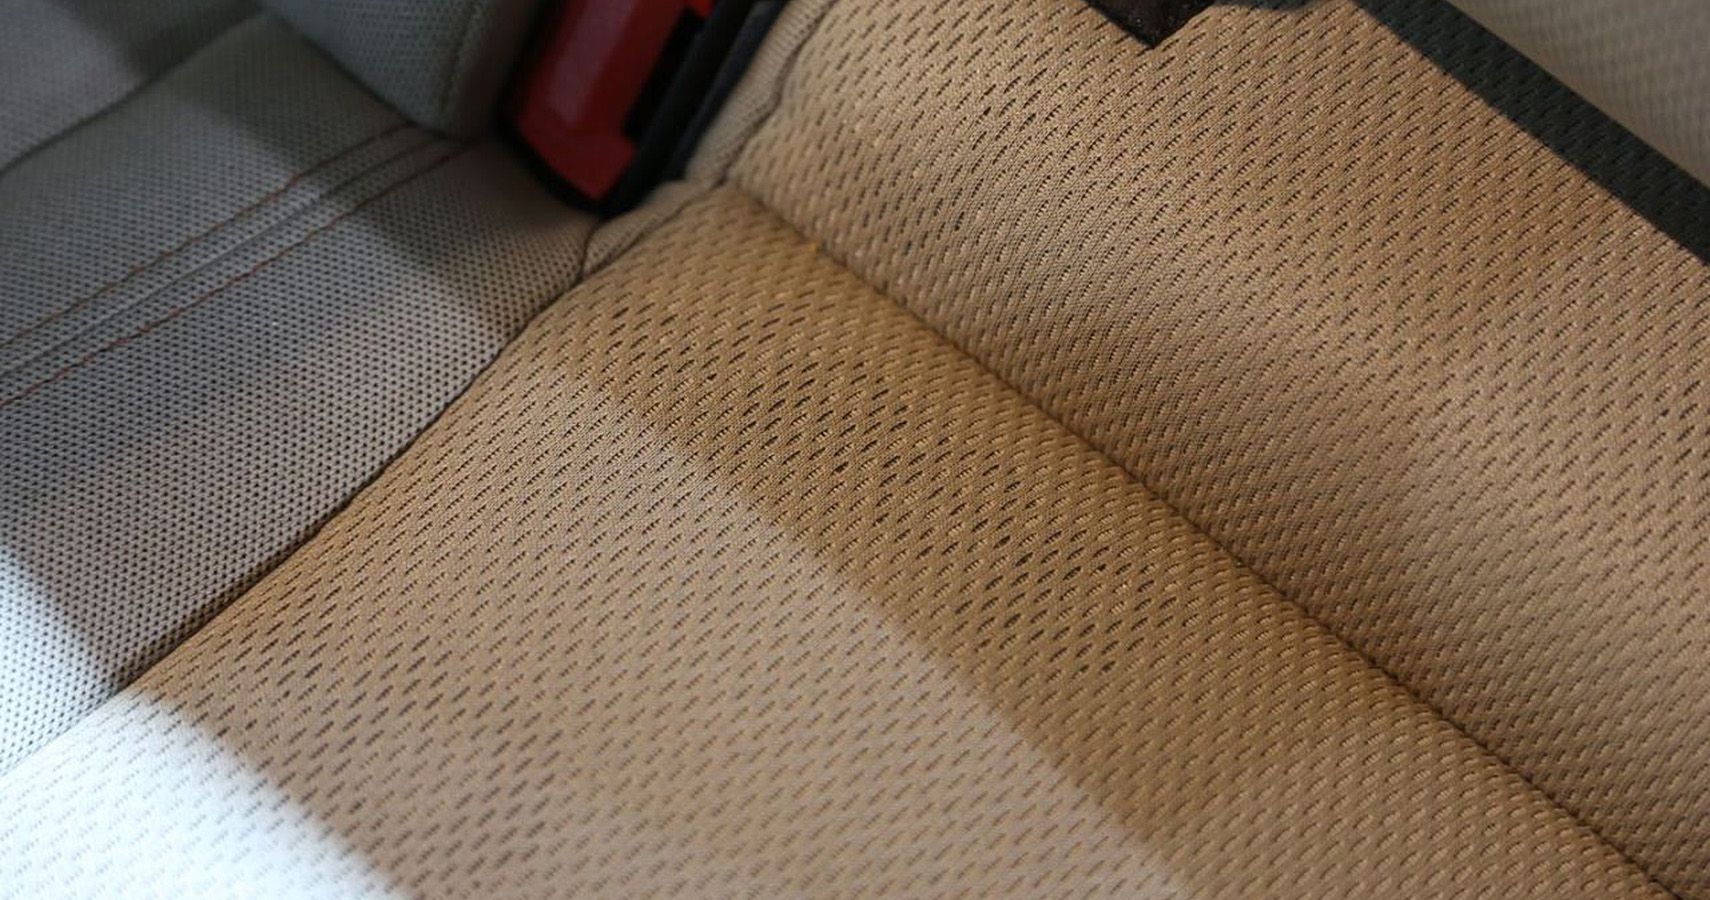 Jeep Logos Under The Seat Fabric